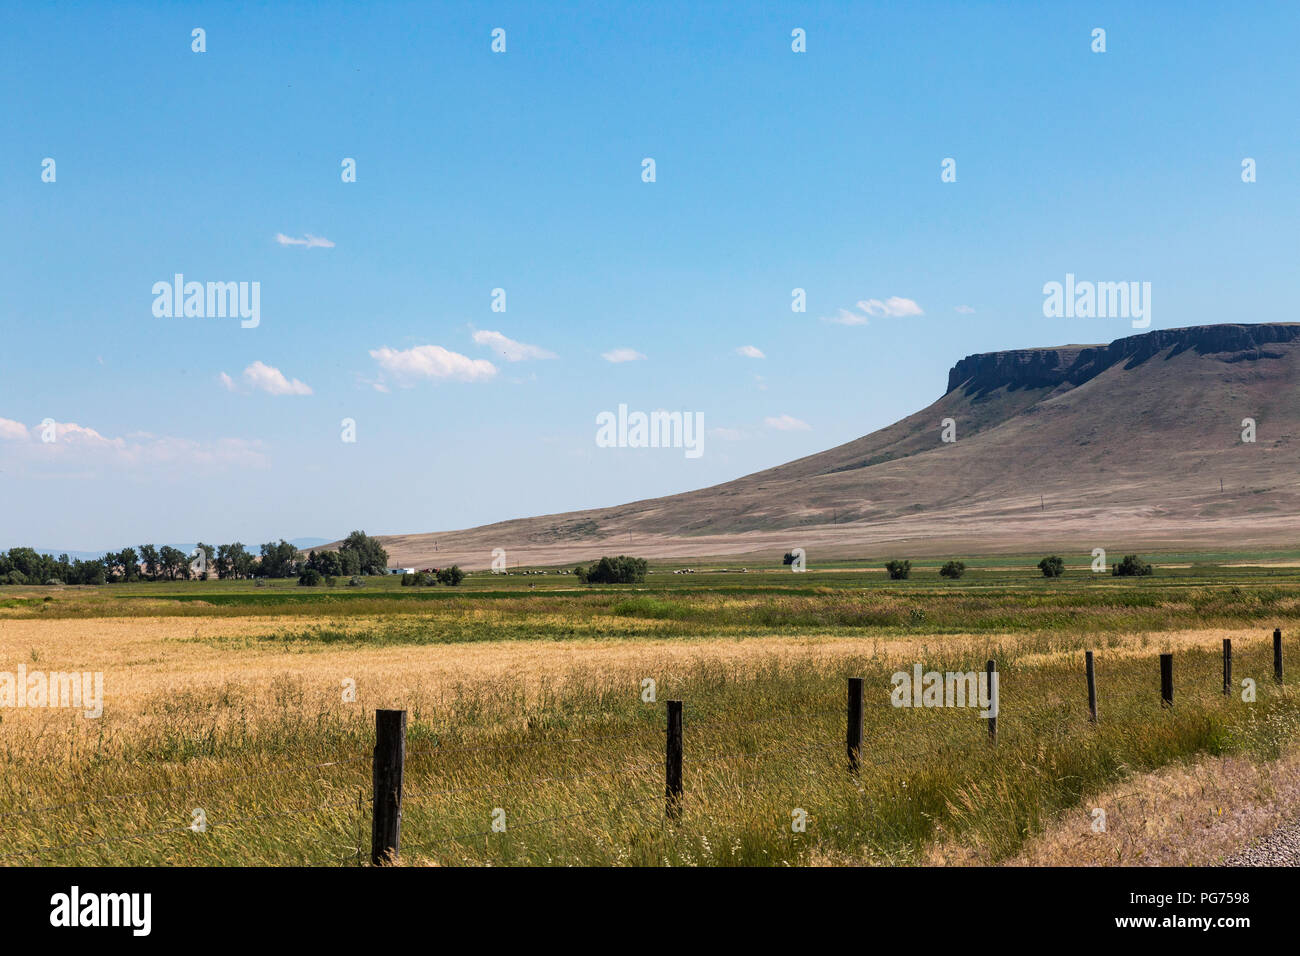 Square Butte is an iconic landmark in Montana, USA Stock Photo